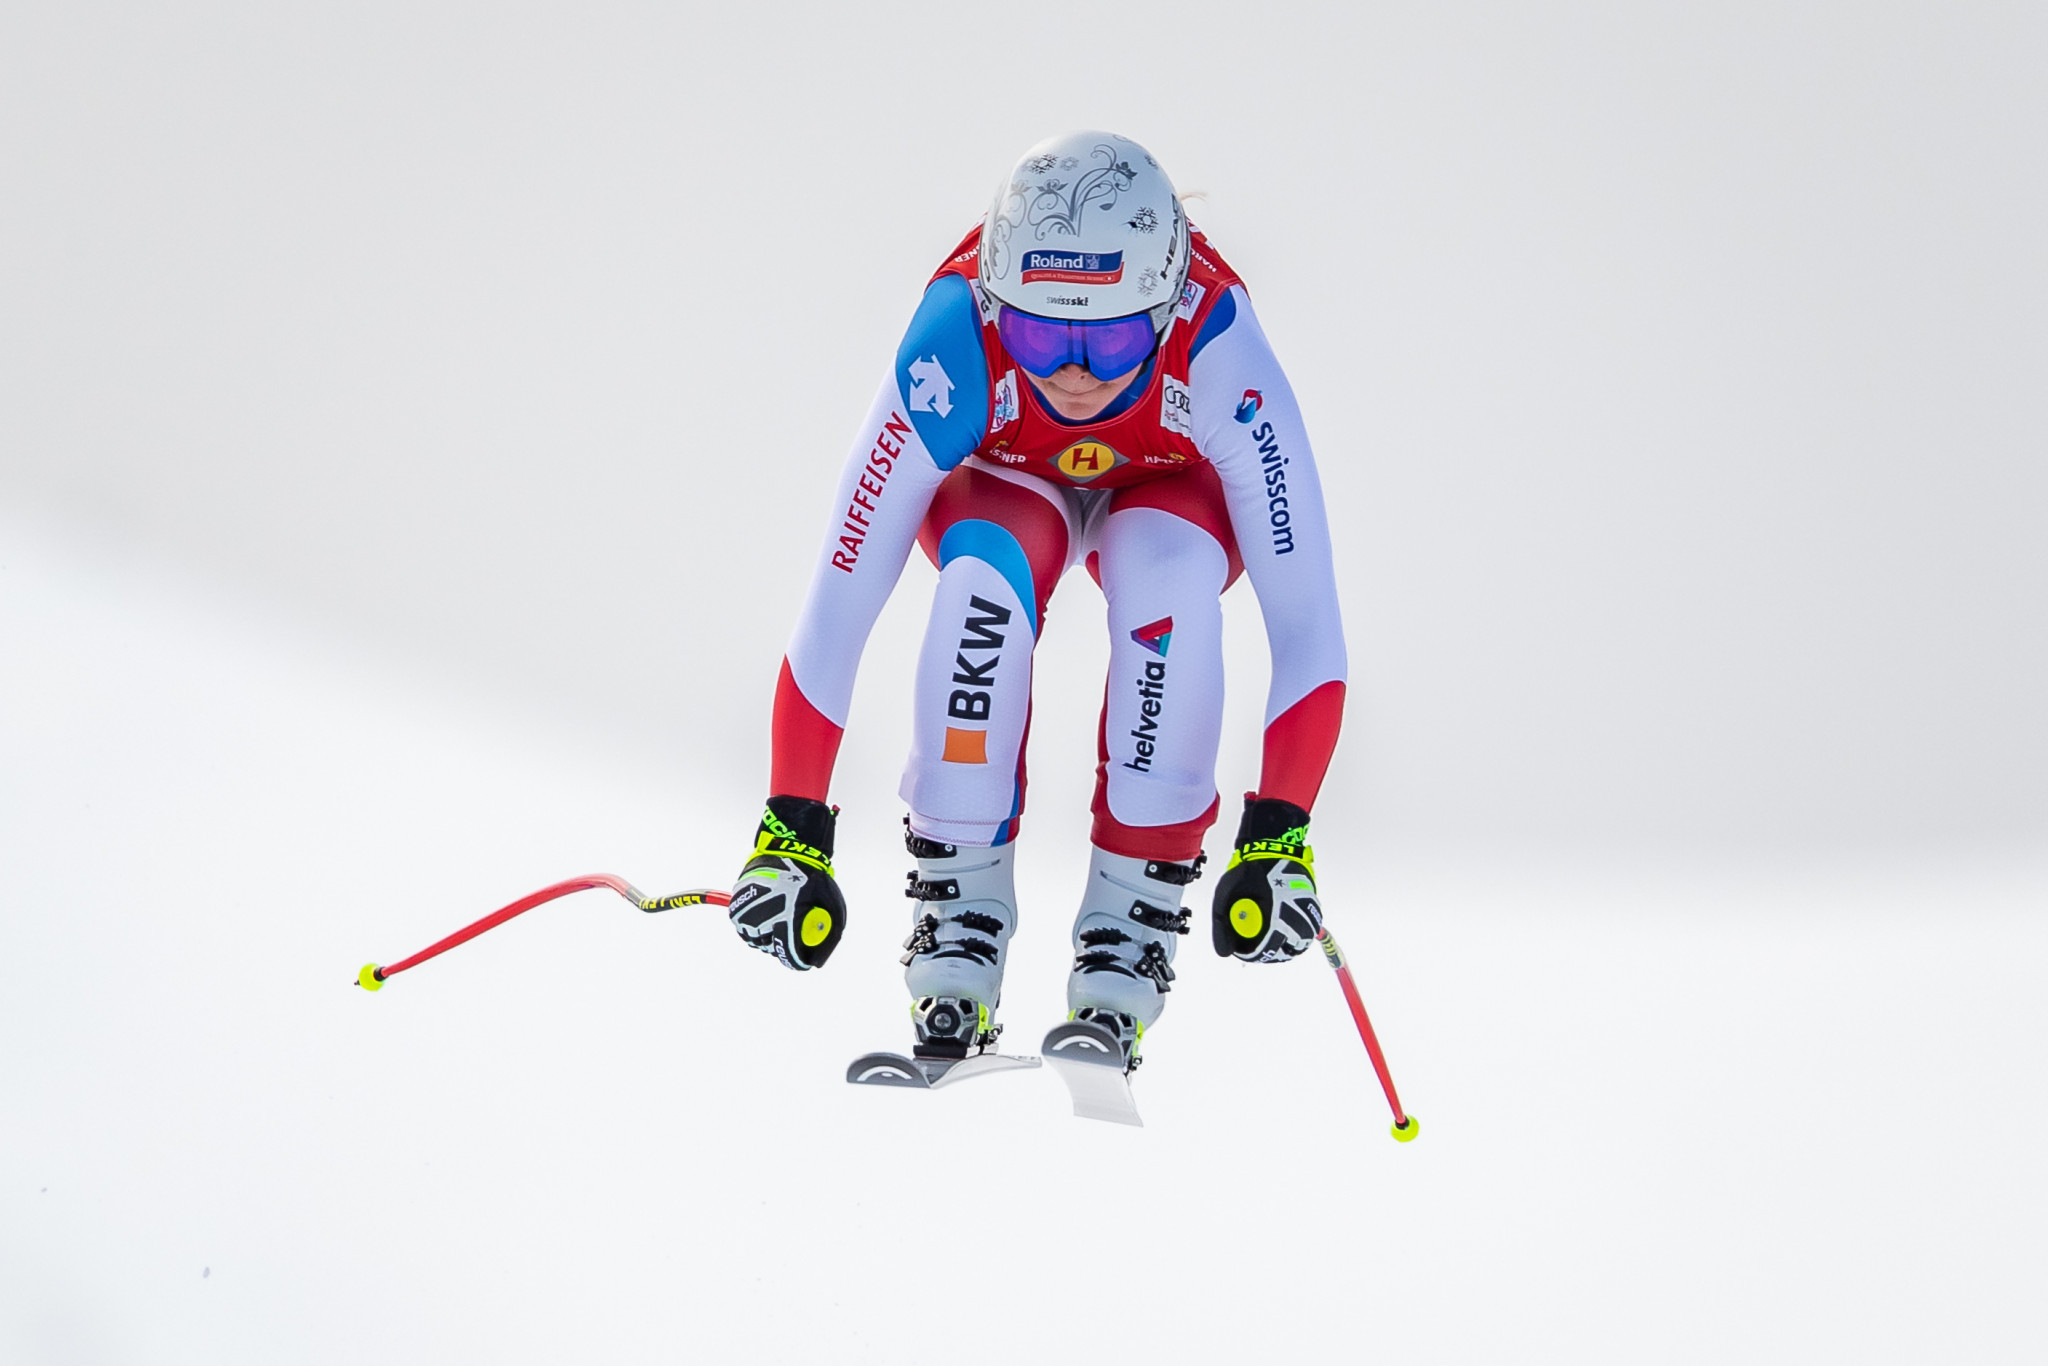 Corrine Suter on her way to victory in Alternmarkt, Austria, in the third leg of the World Cup downhill ©Getty Images